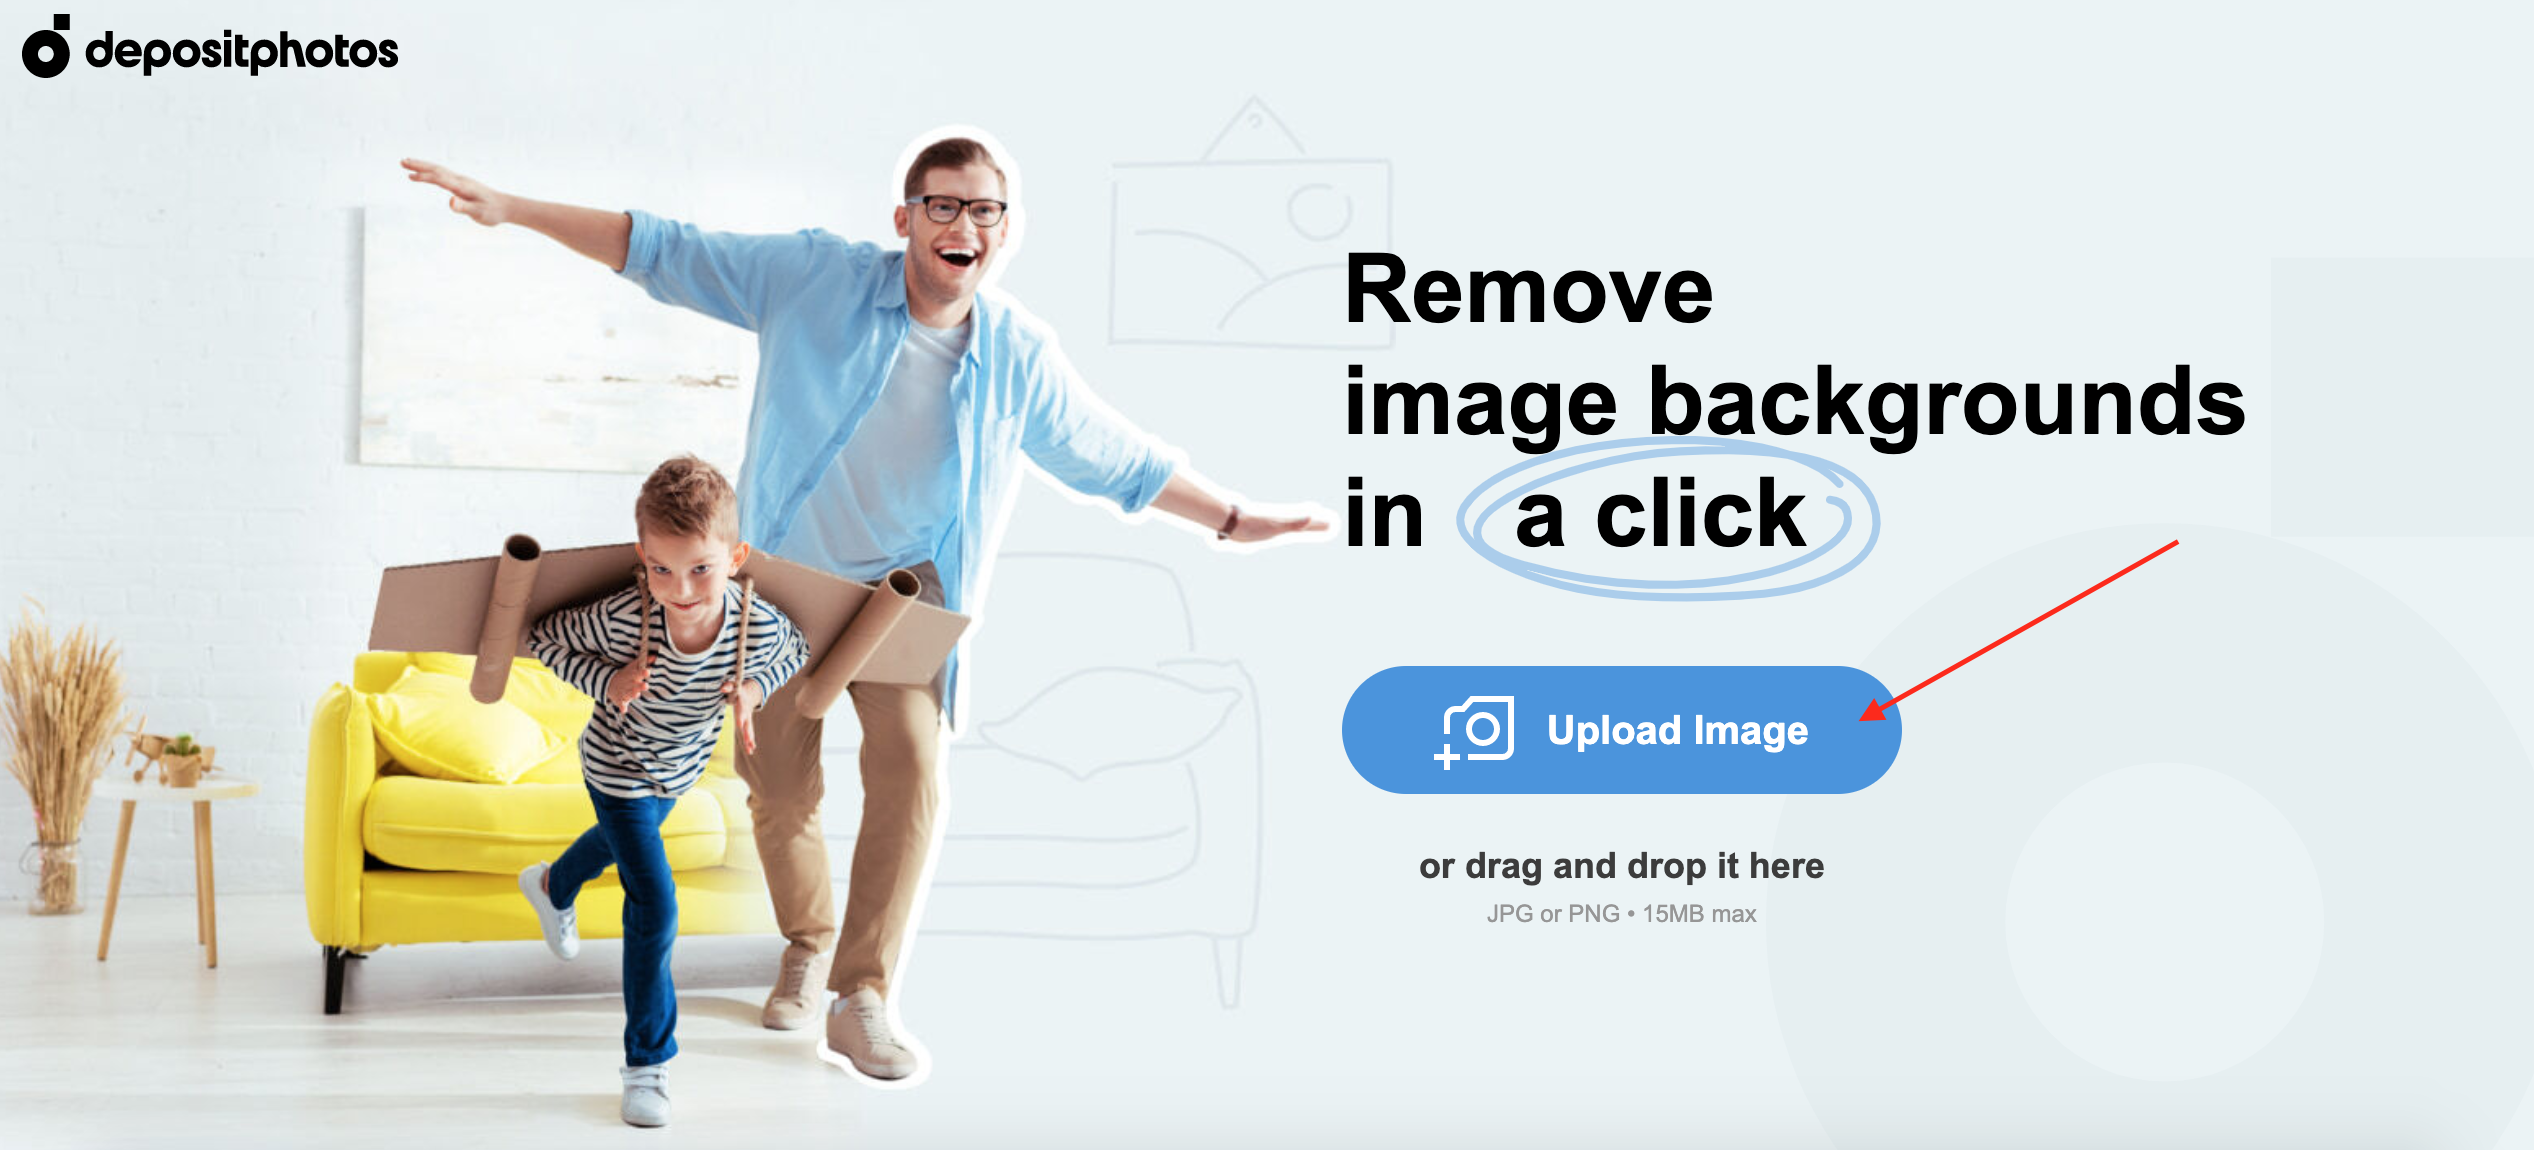 Depositphotos Background Removal Tool